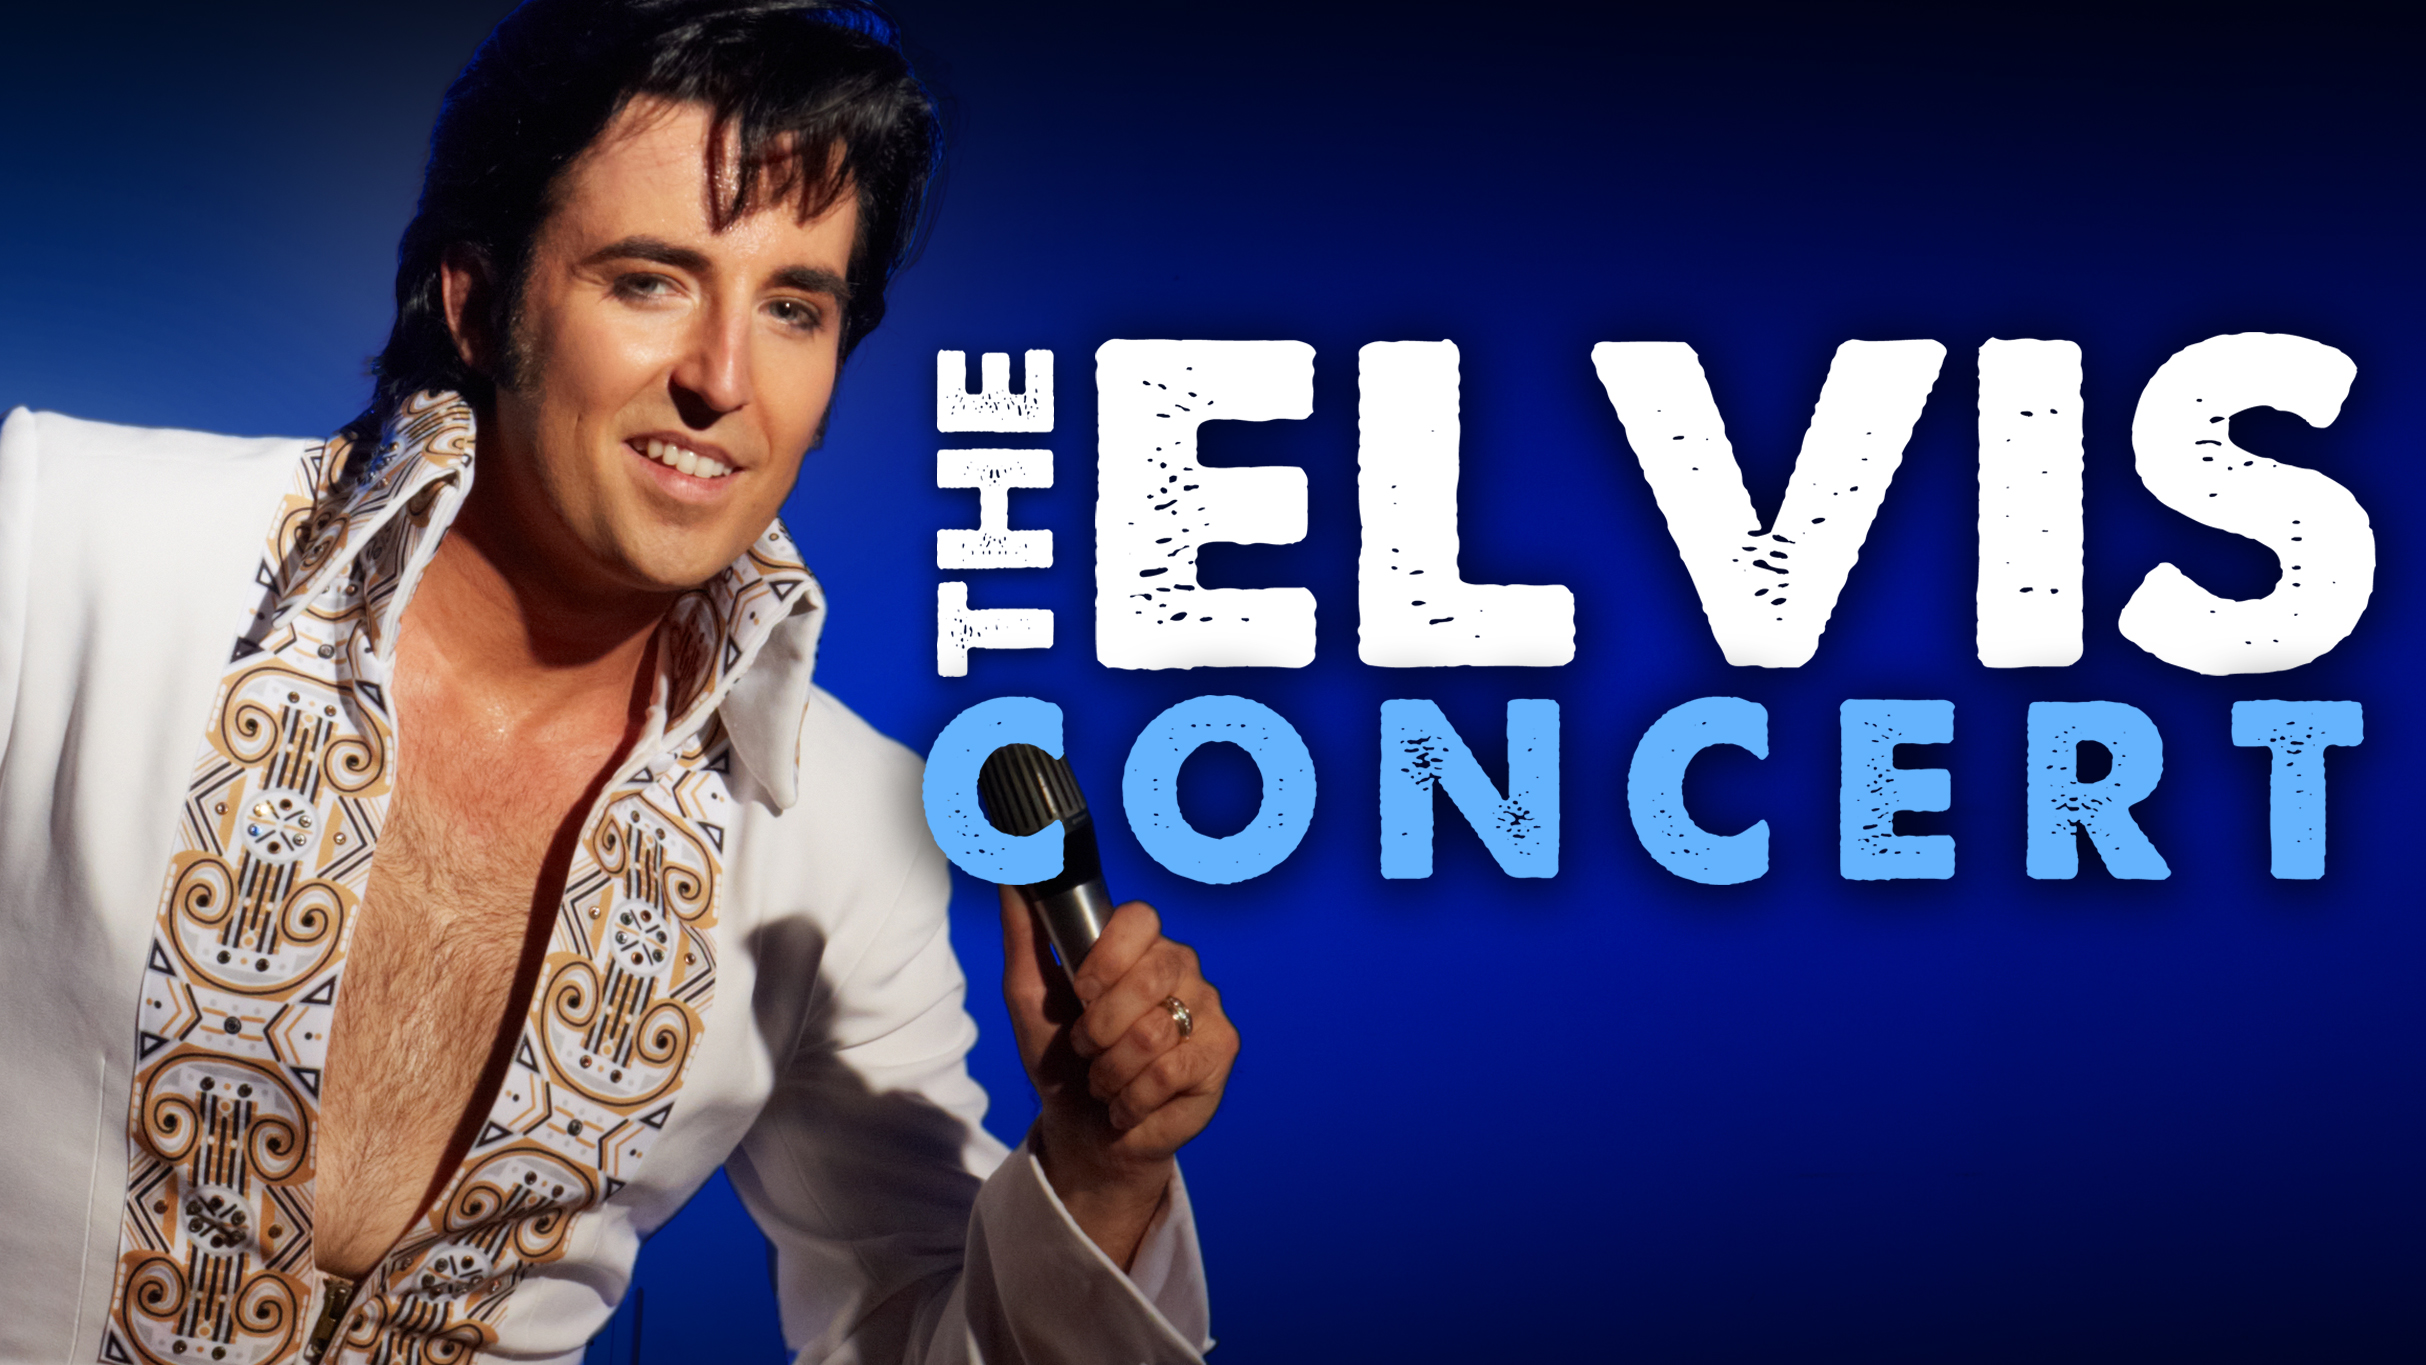 The Elvis Convert show cover